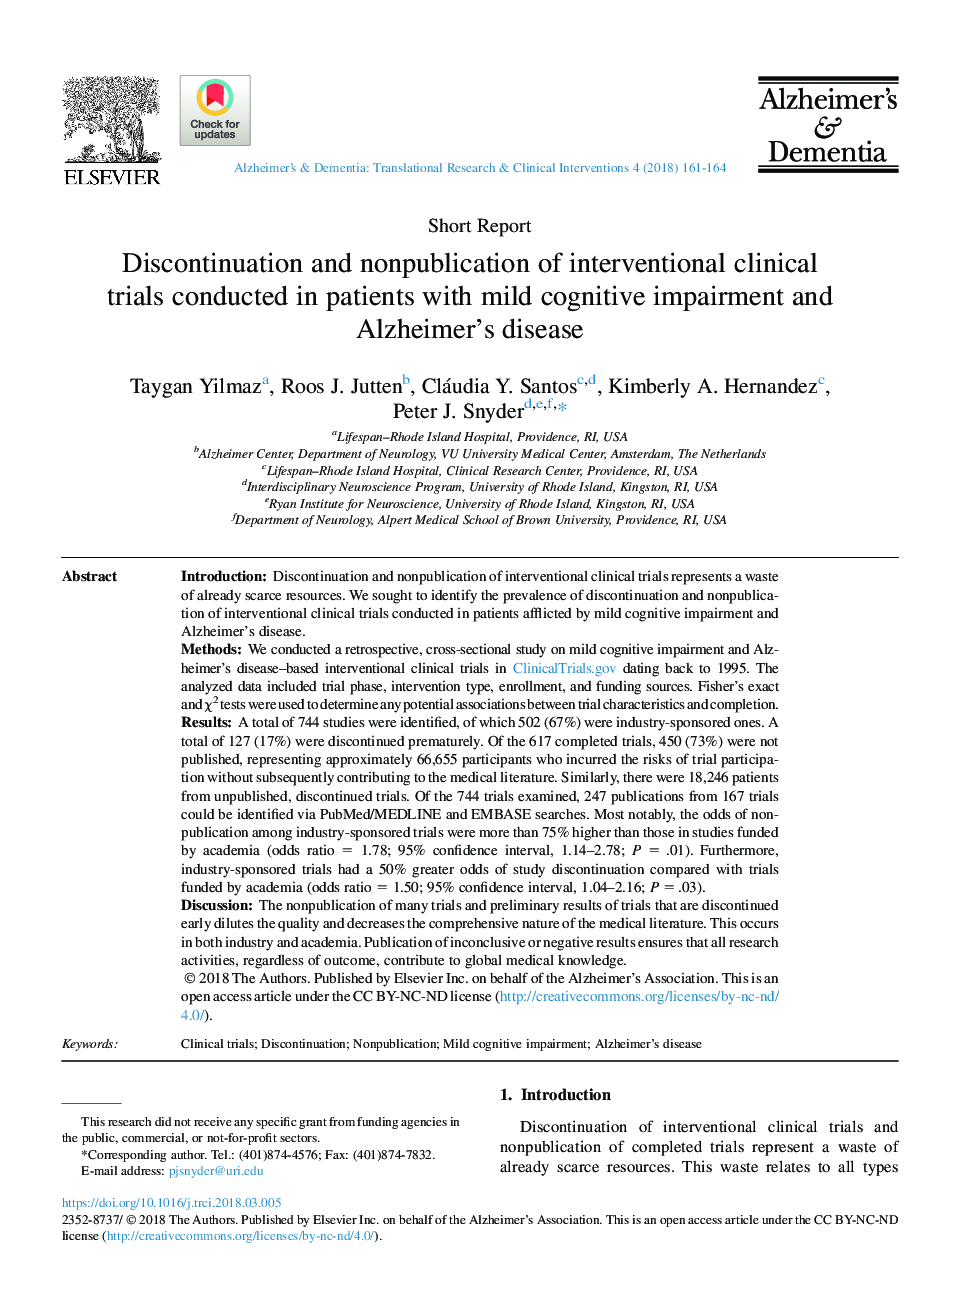 Discontinuation and nonpublication of interventional clinical trials conducted in patients with mild cognitive impairment and Alzheimer's disease